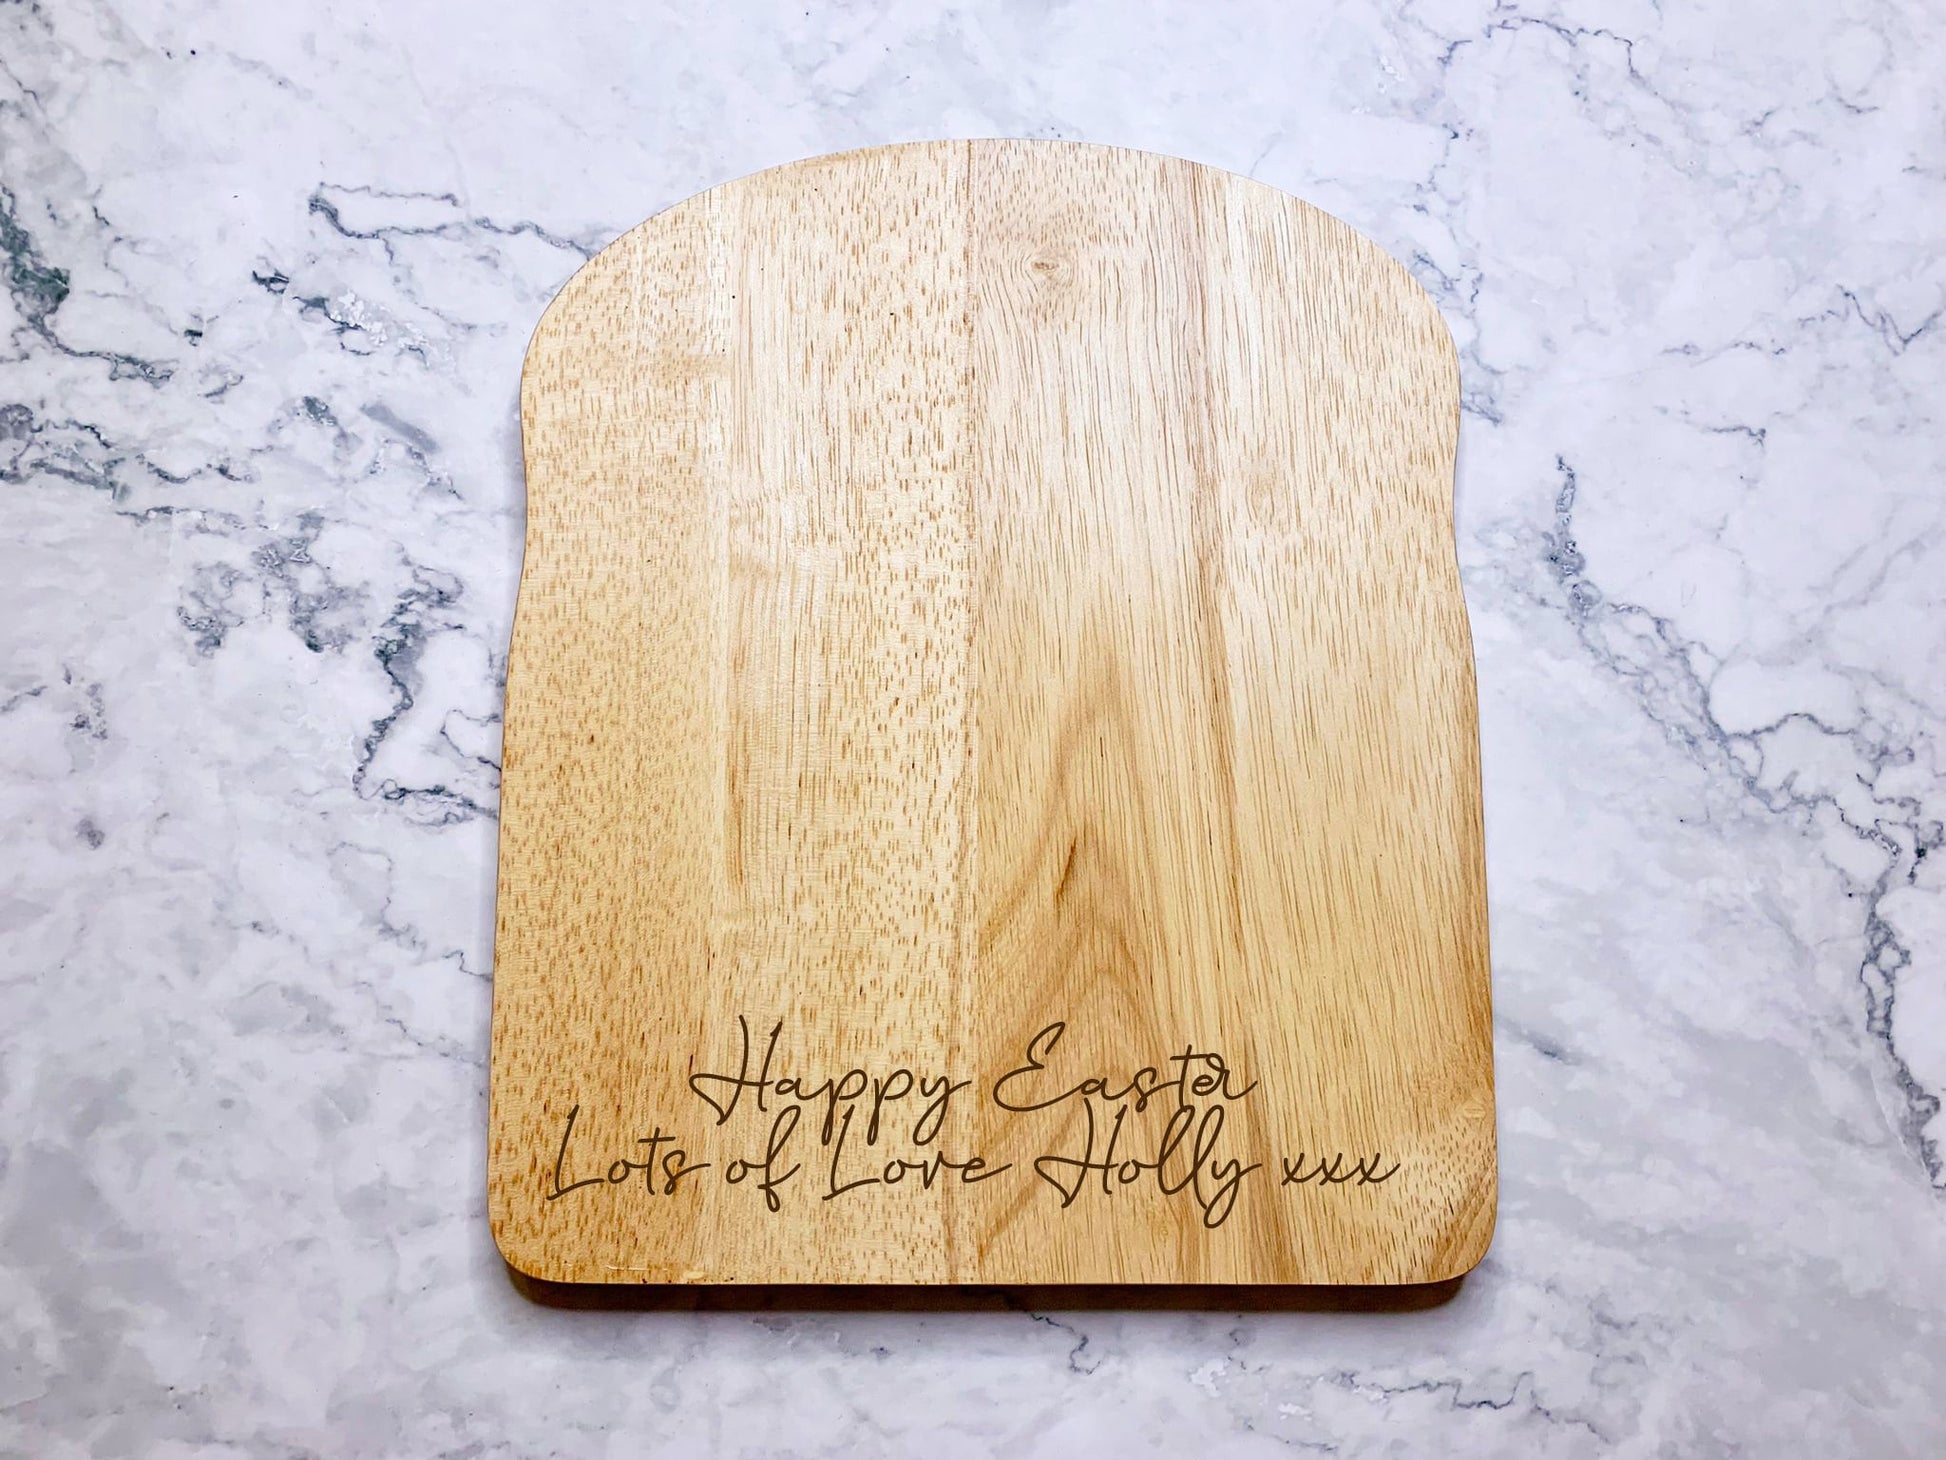 Personalised How do you like your eggs in the morning? Wooden Breakfast Board, Egg and Toast Board, Dippy Egg Board - Resplendent Aurora